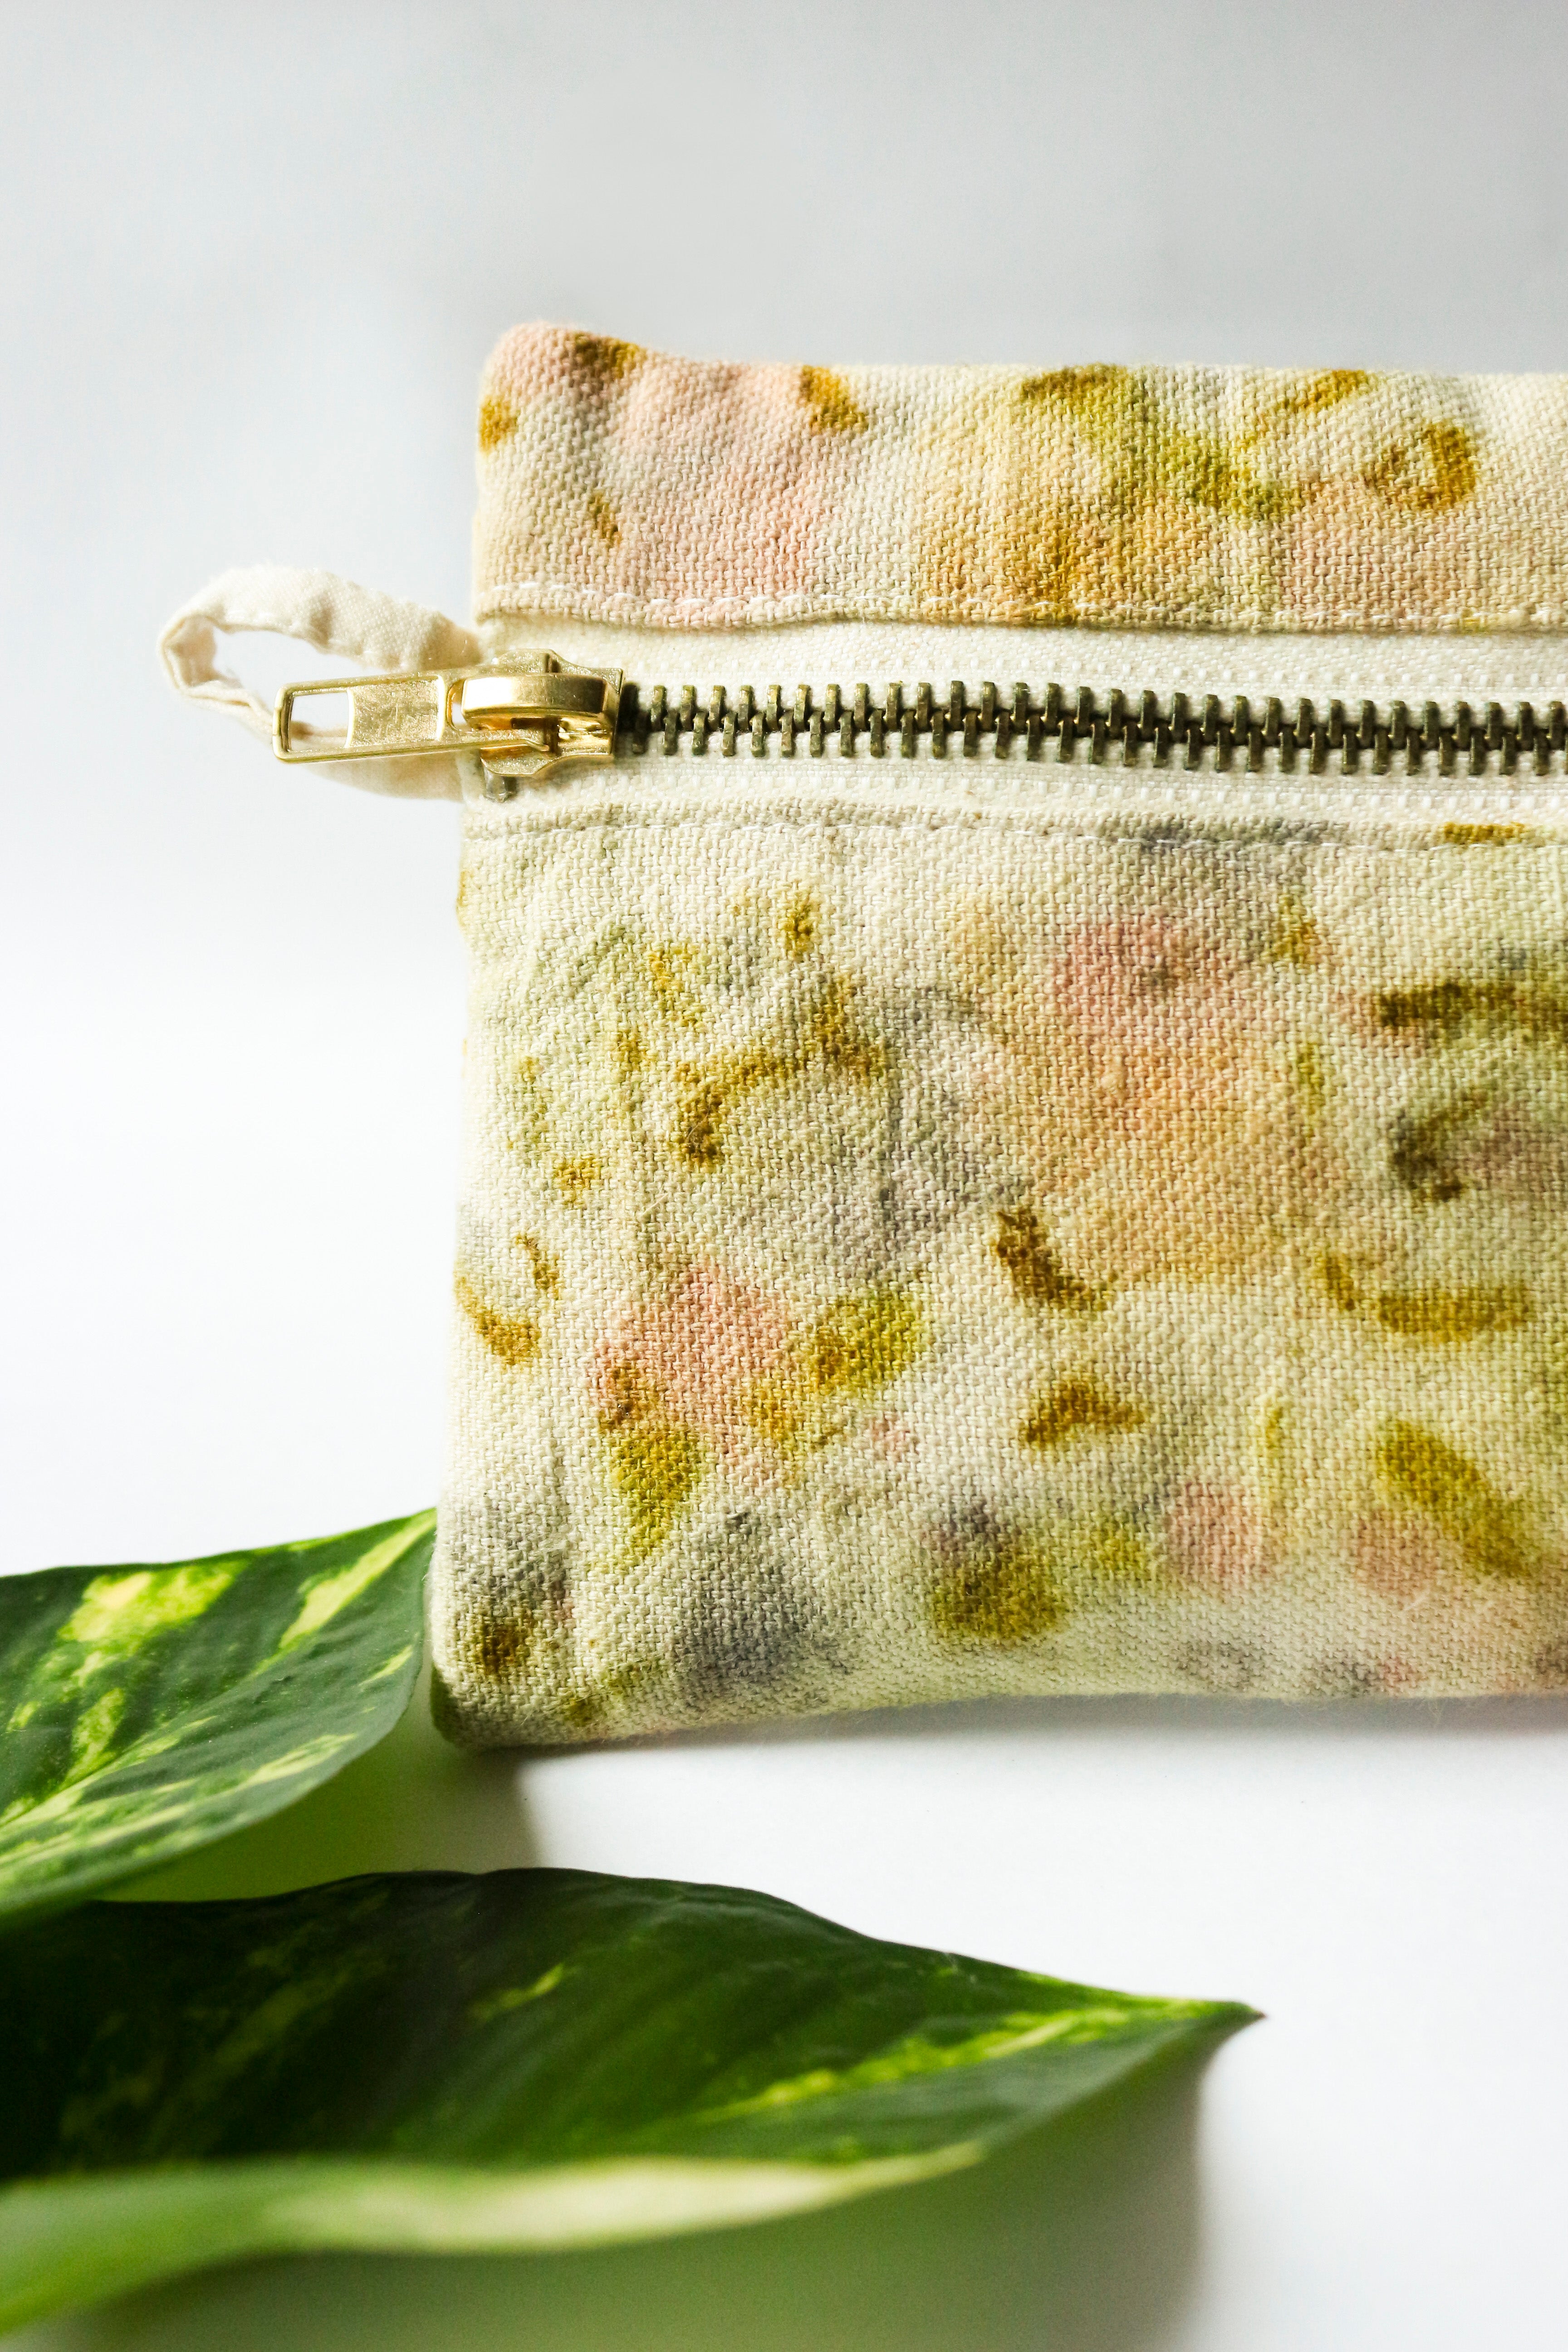 Floral Small Pouch